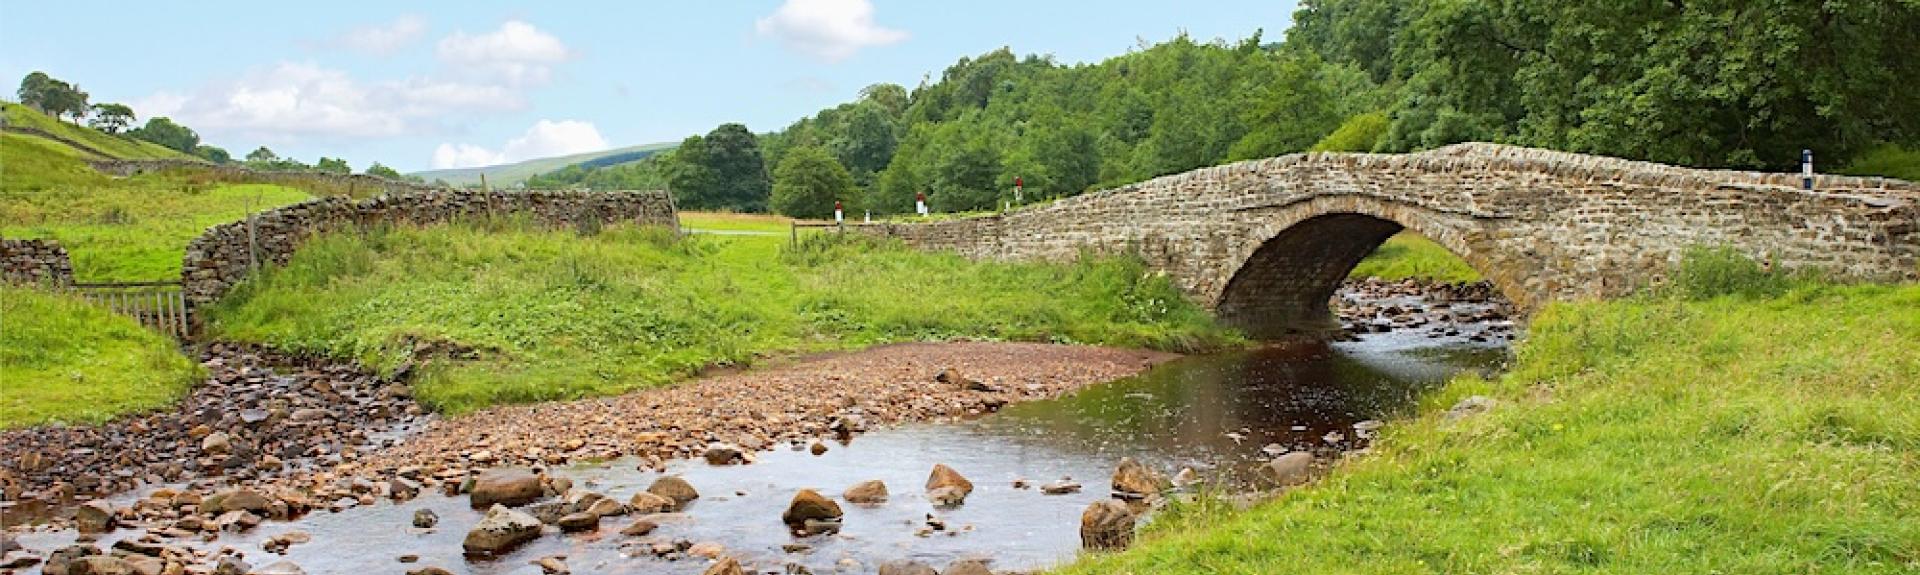 A single arched stone bridge crosses a shallow, rock-filled river in the countryside.